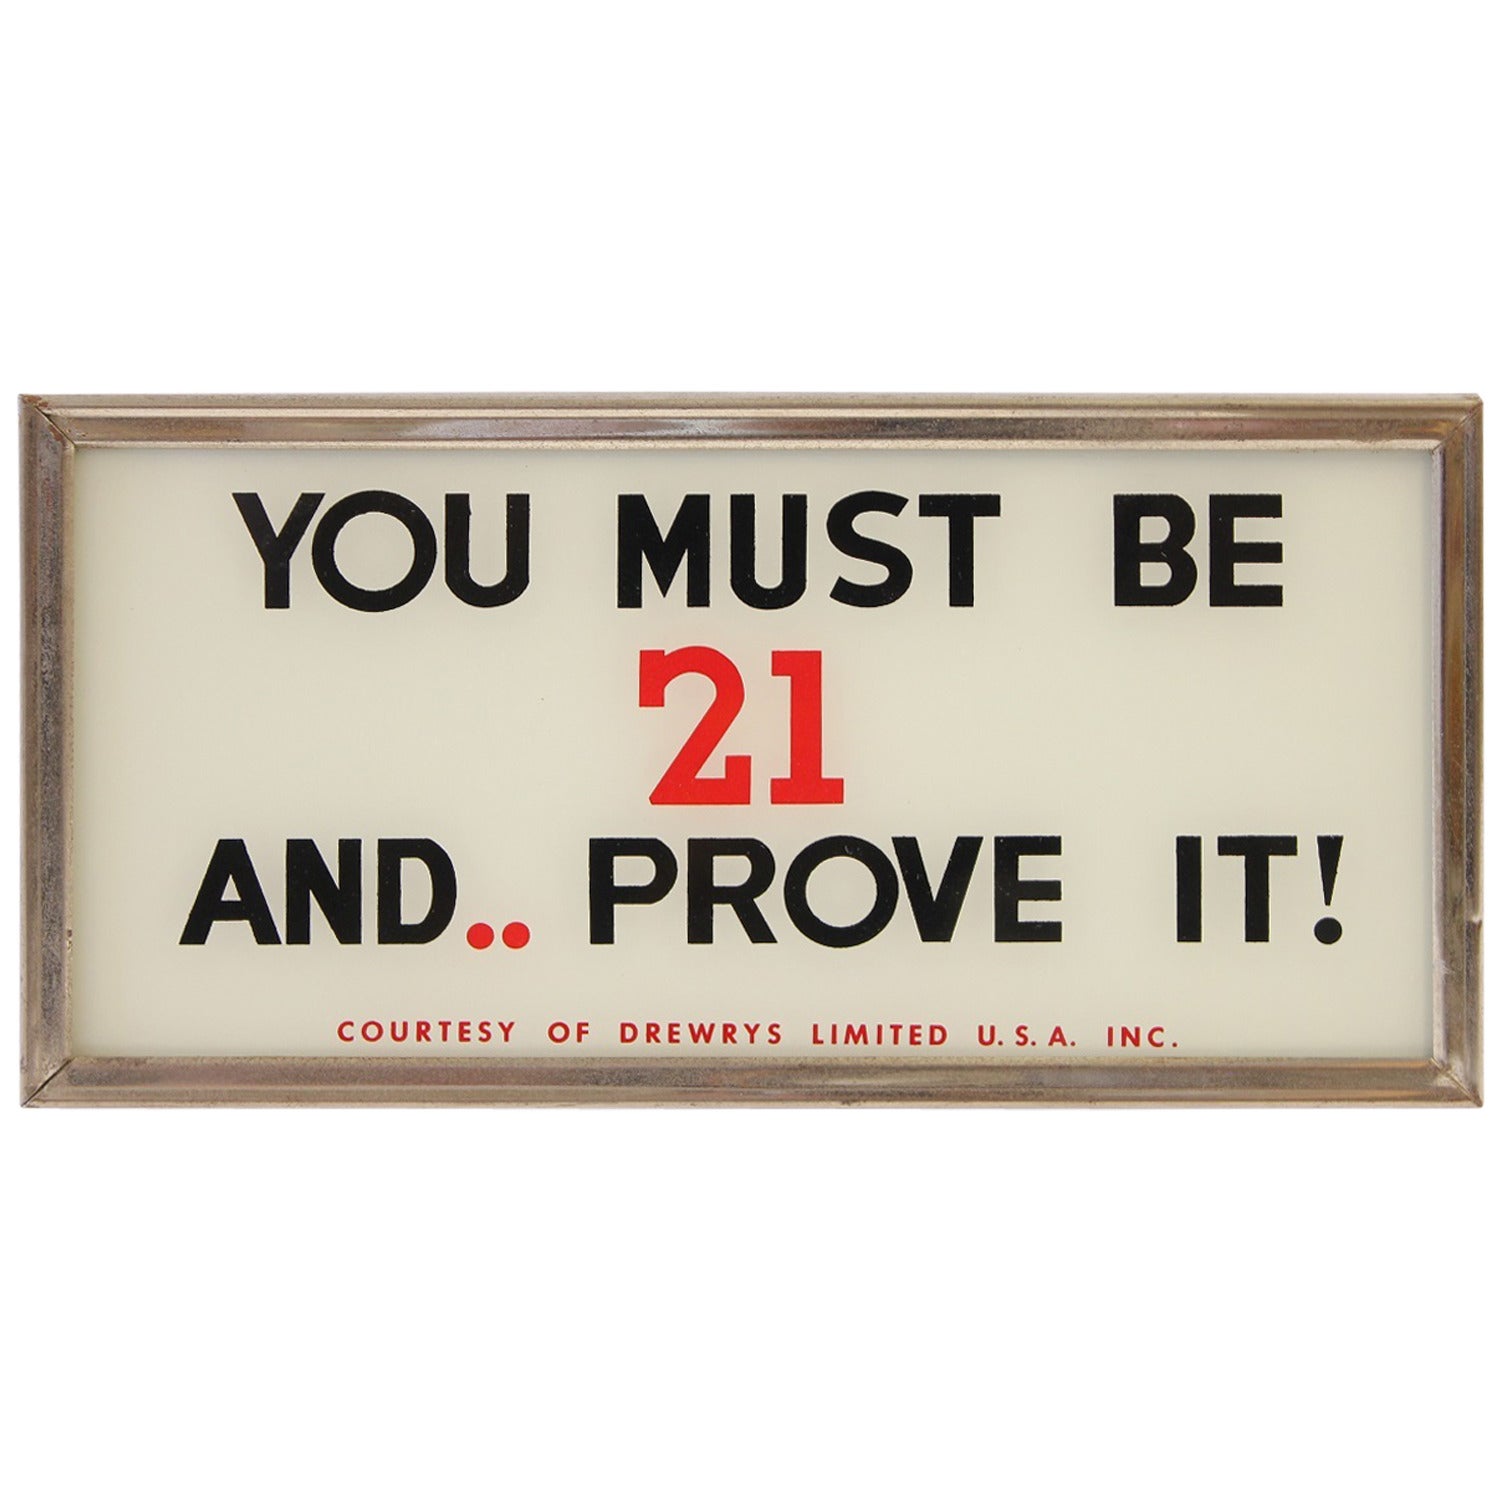 Vintage Glass Sign "You Must Be 21 and Prove It "